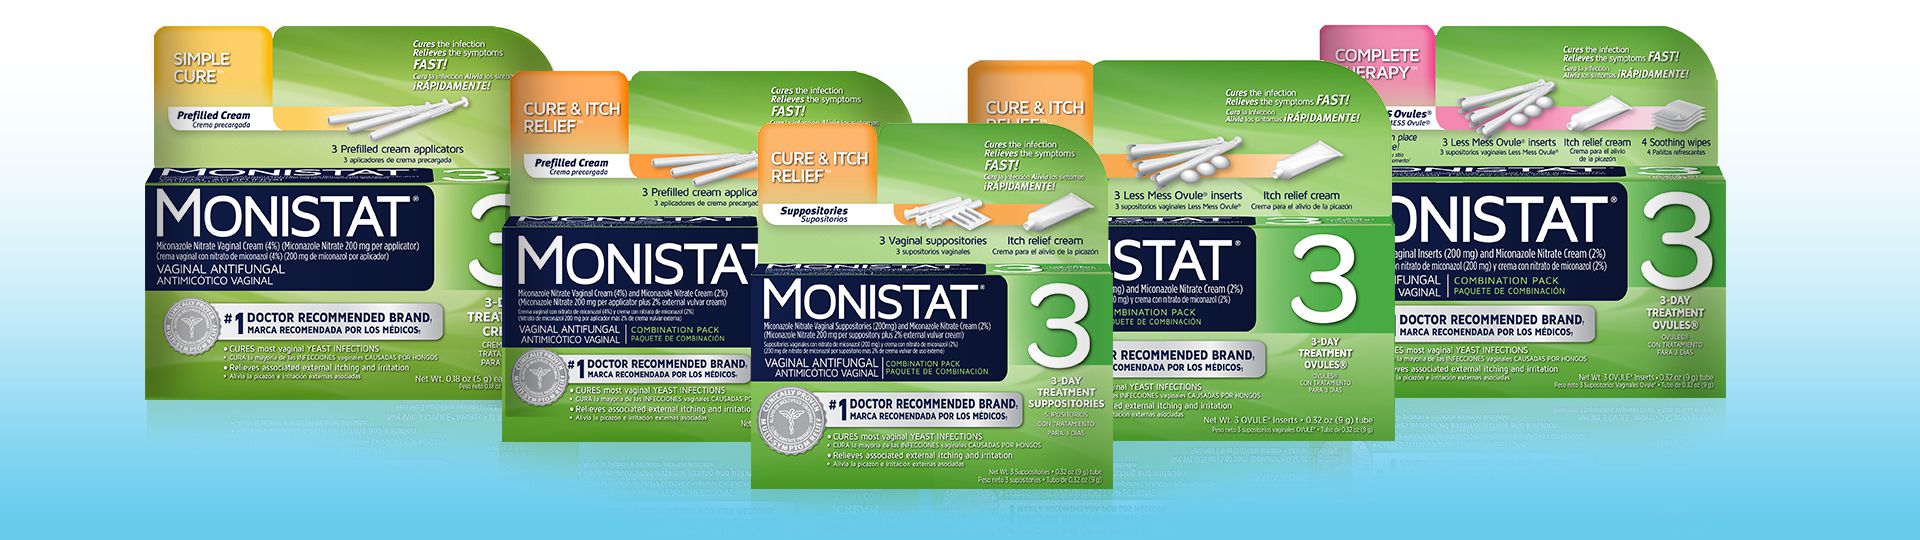 MONISTAT® Is Important For Those Not-So Comfortable Moments